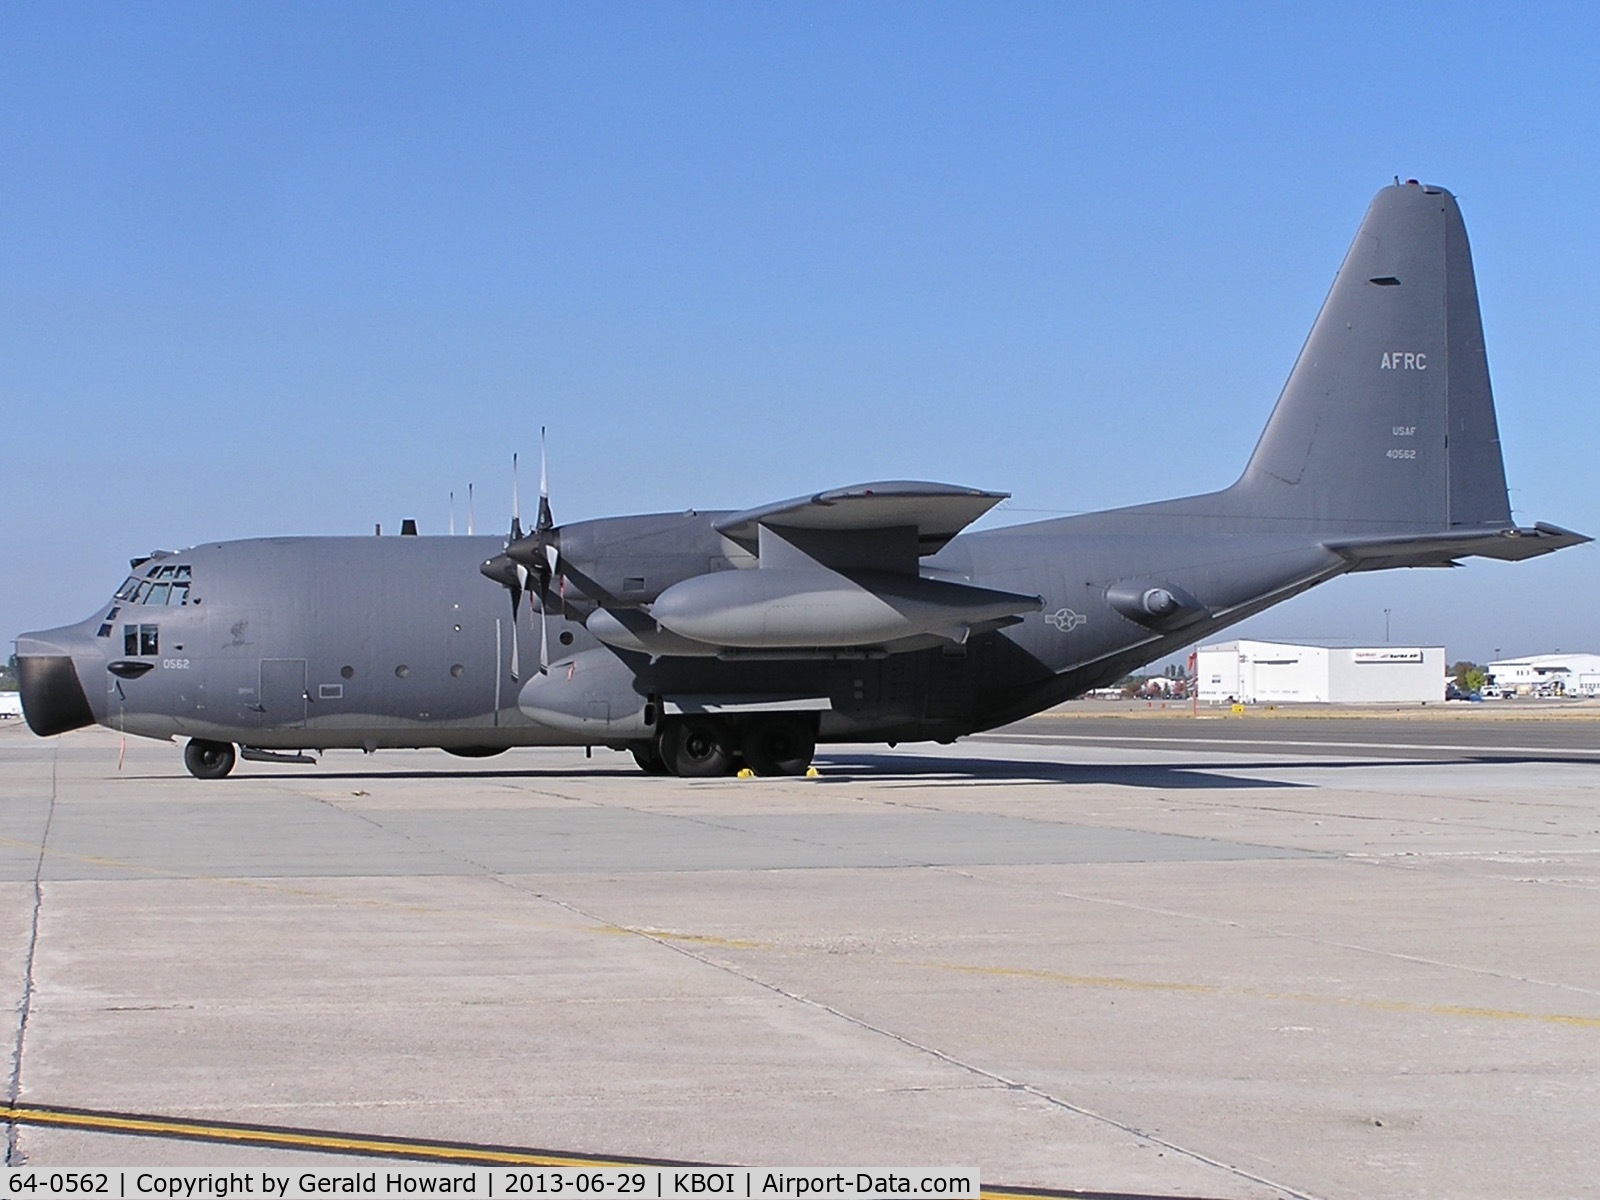 64-0562, 1964 Lockheed MC-130E Hercules C/N 382-4068, 711th SOS out of Duke Field, FL. The 711th switched aircraft in May 2013, so this Combat Talon was probably on the way to the Bone yard in AZ.